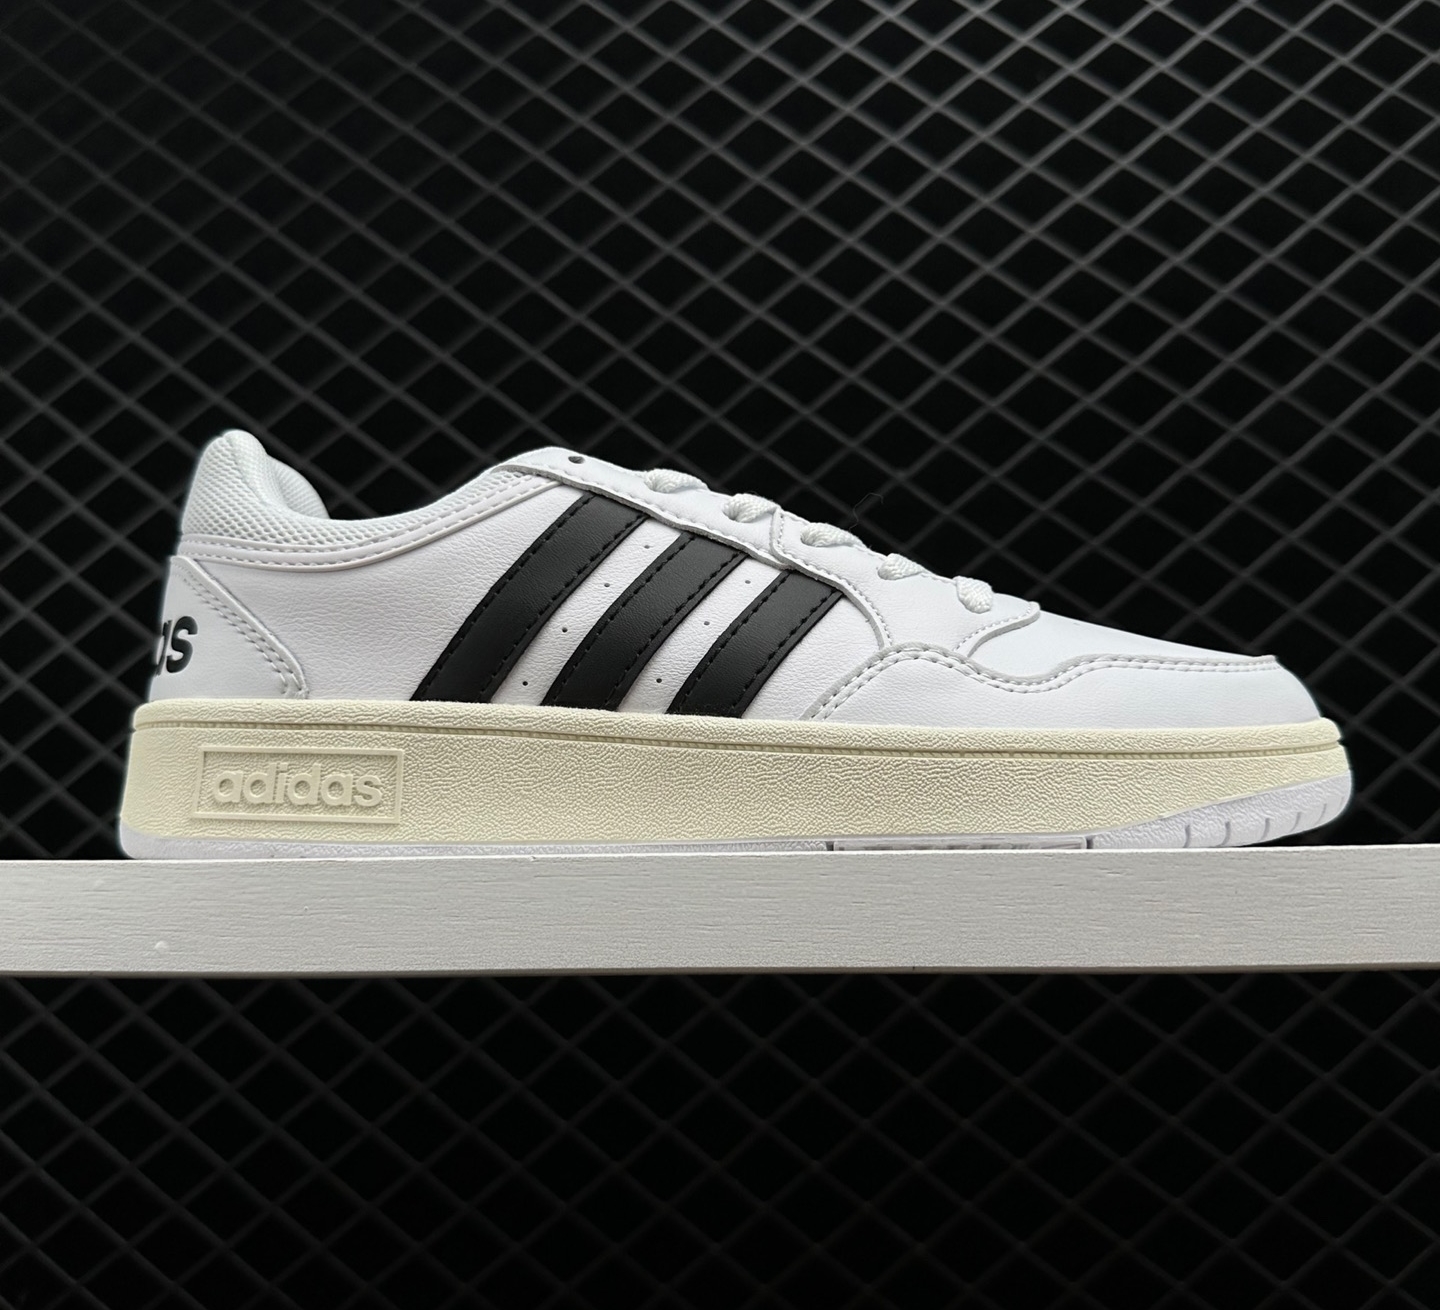 Adidas Hoops 3.0 Low Classic Vintage Shoes - White Black GY5434 | Limited Edition